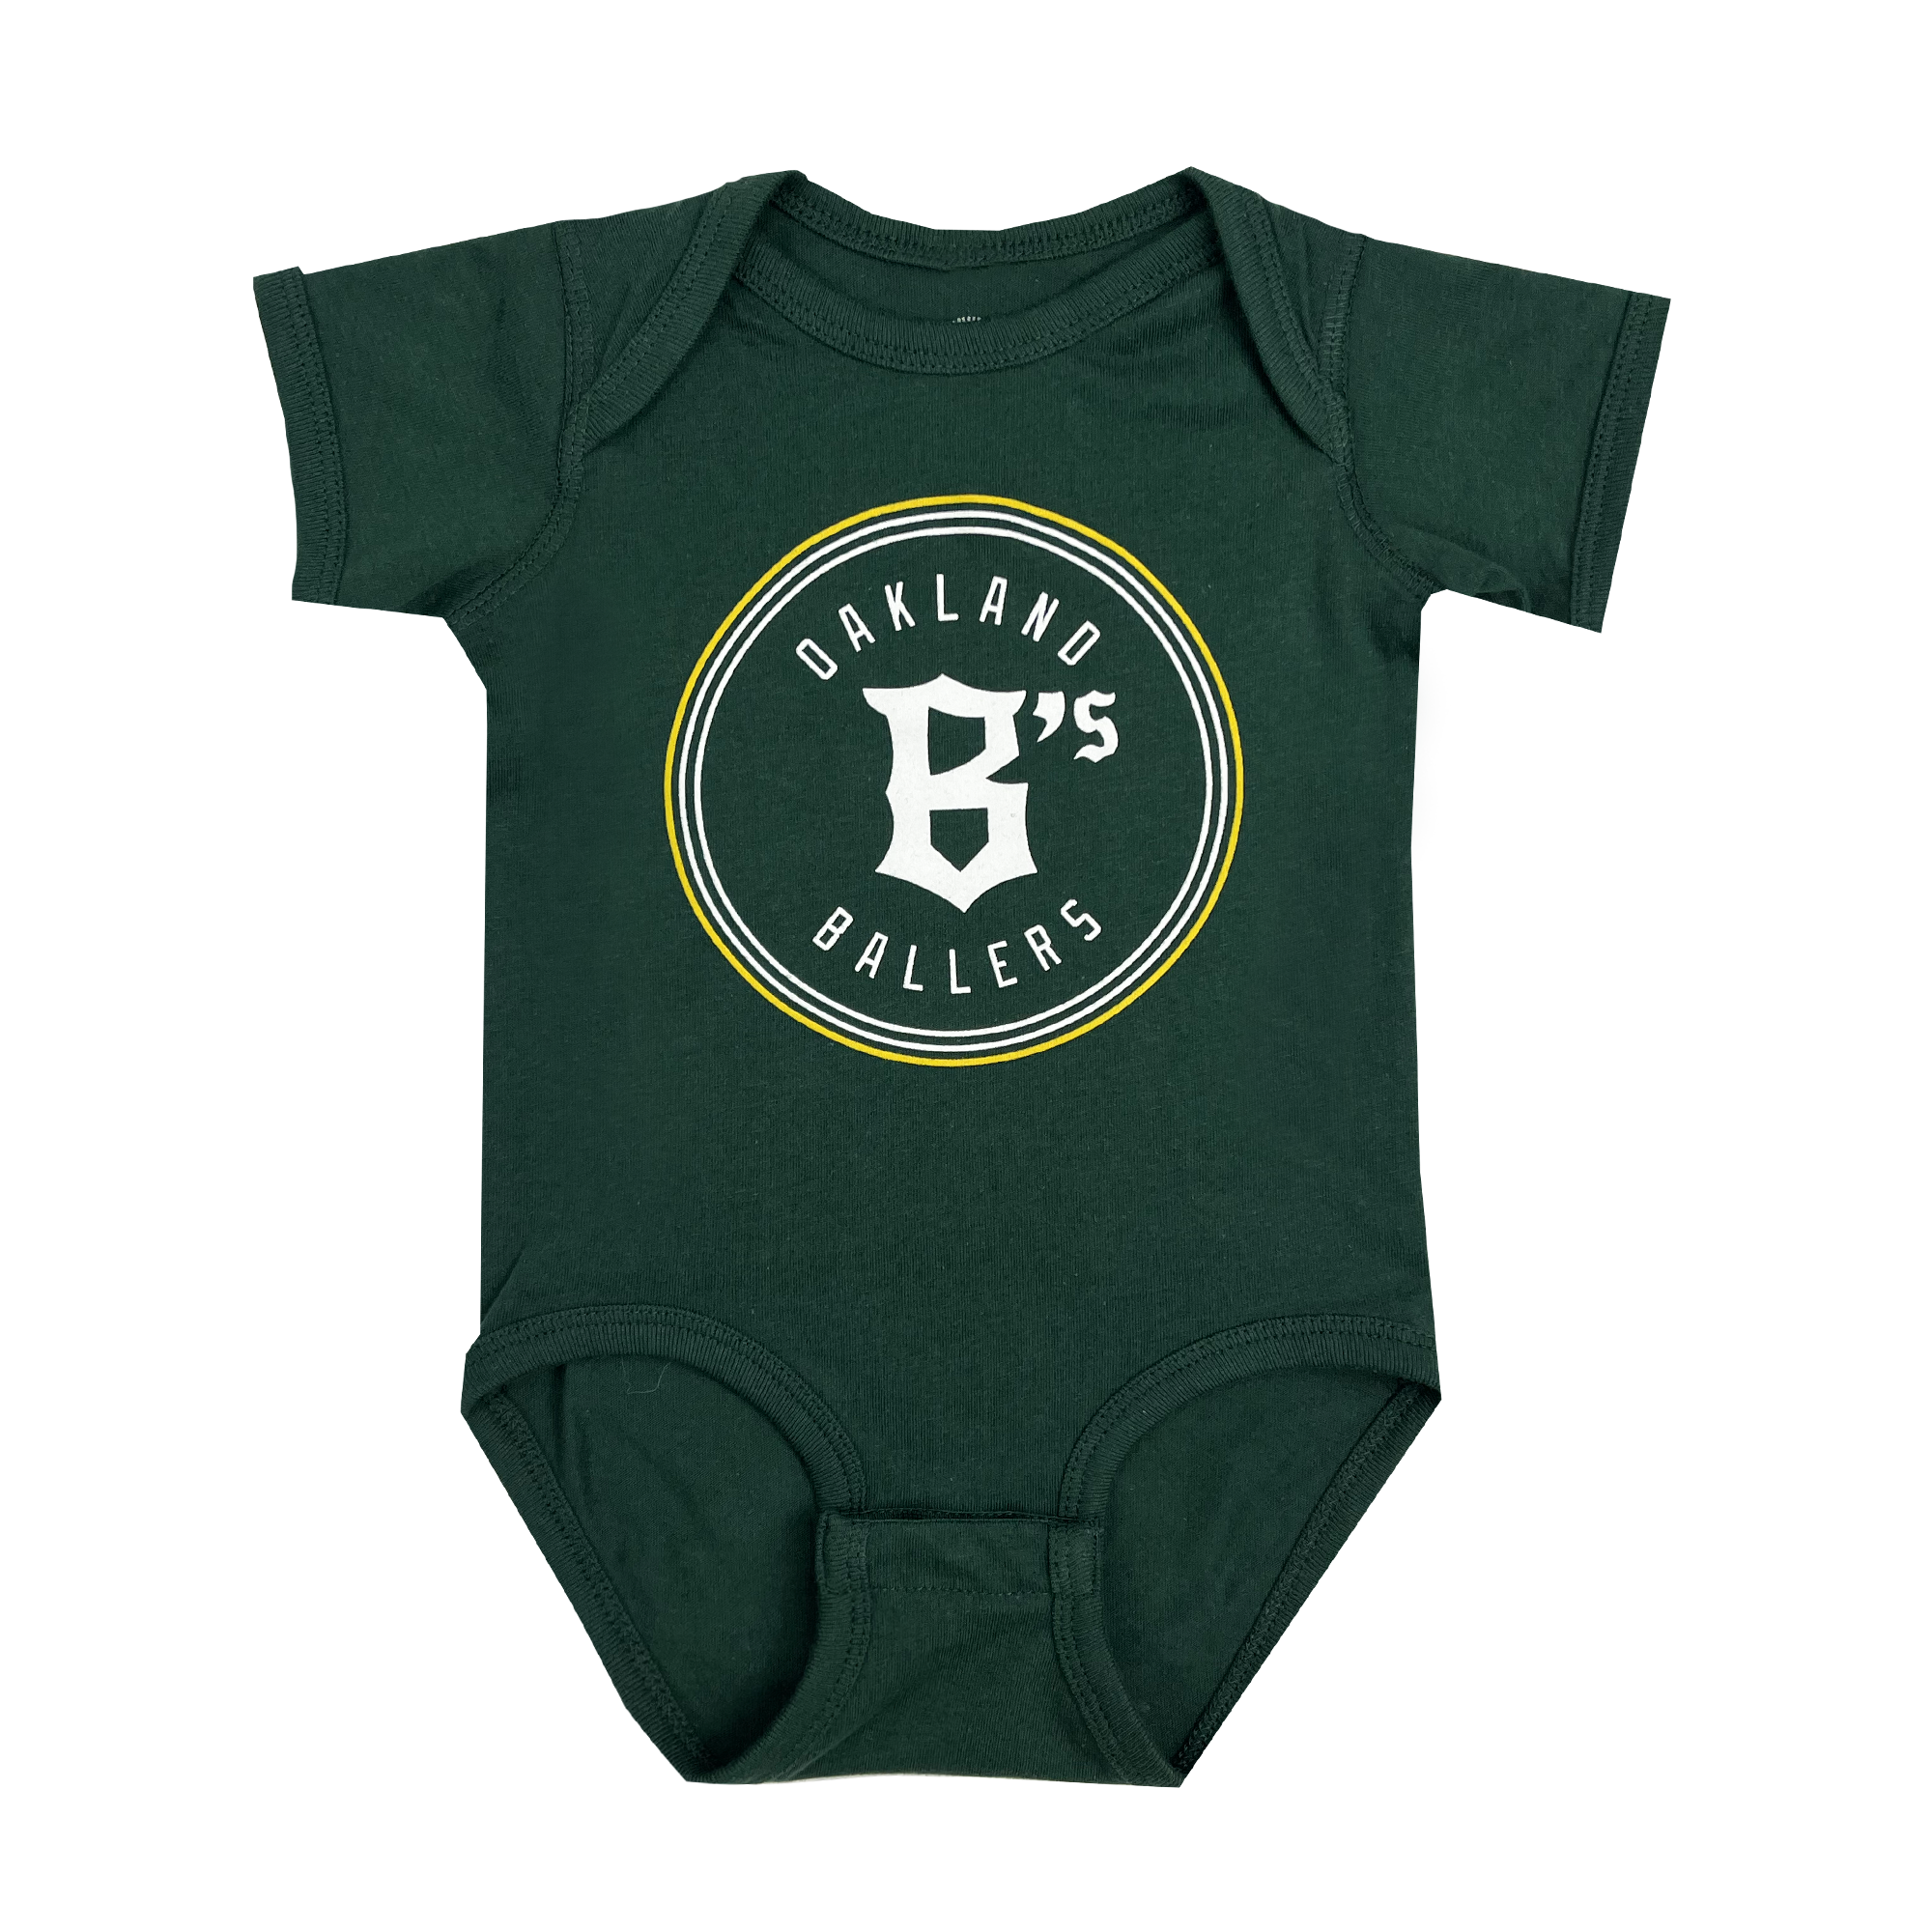 Baby one-piece in forest green with yellow and white Oakland Ballers logo centered .